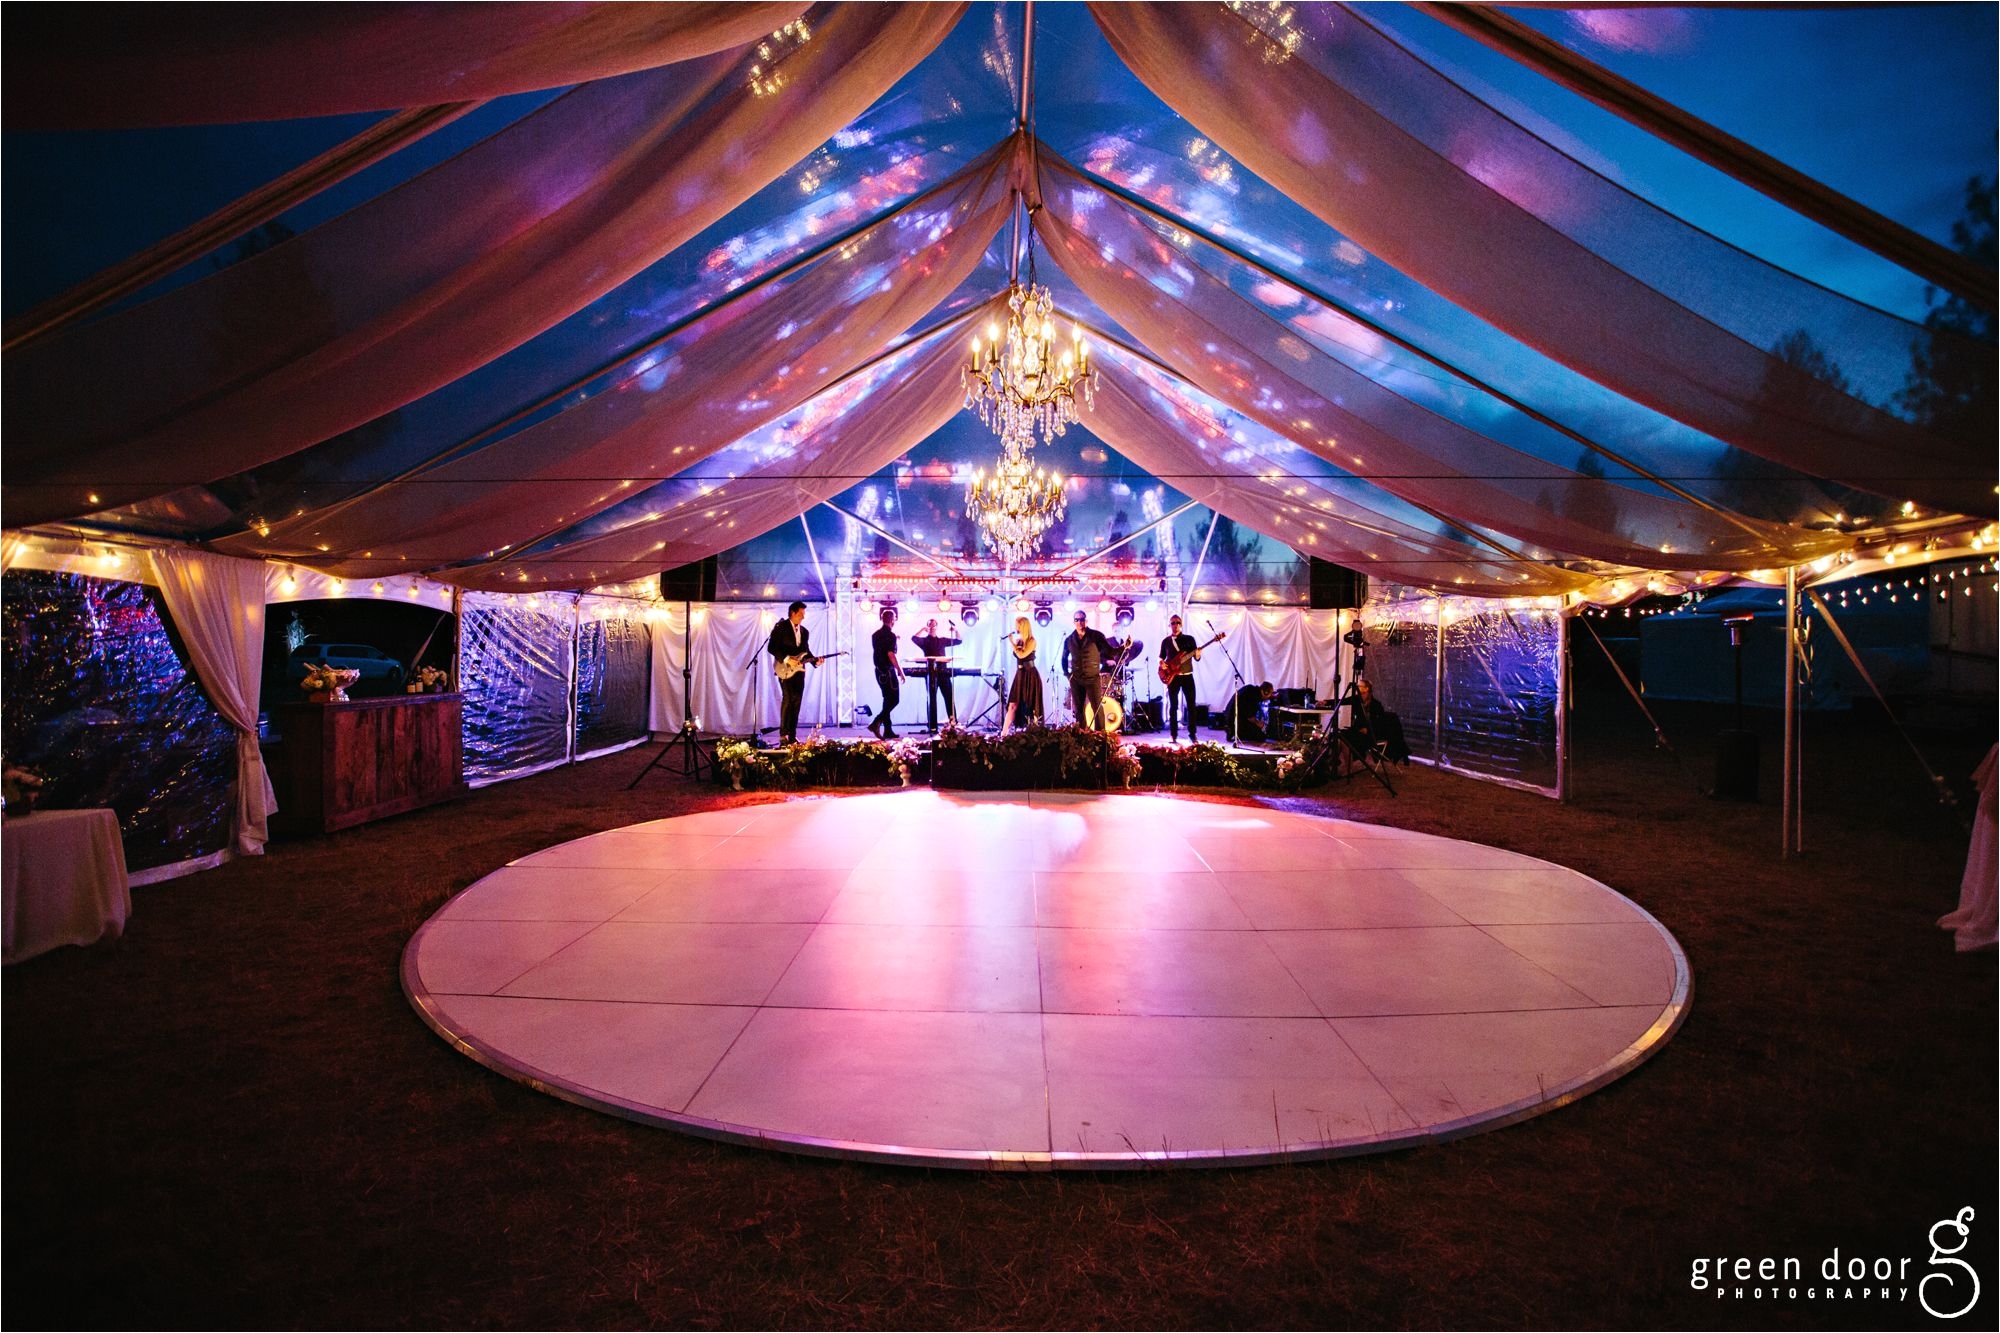 40x60 clear top tent kathy ireland chandeliers up lighting and white circle dance floor